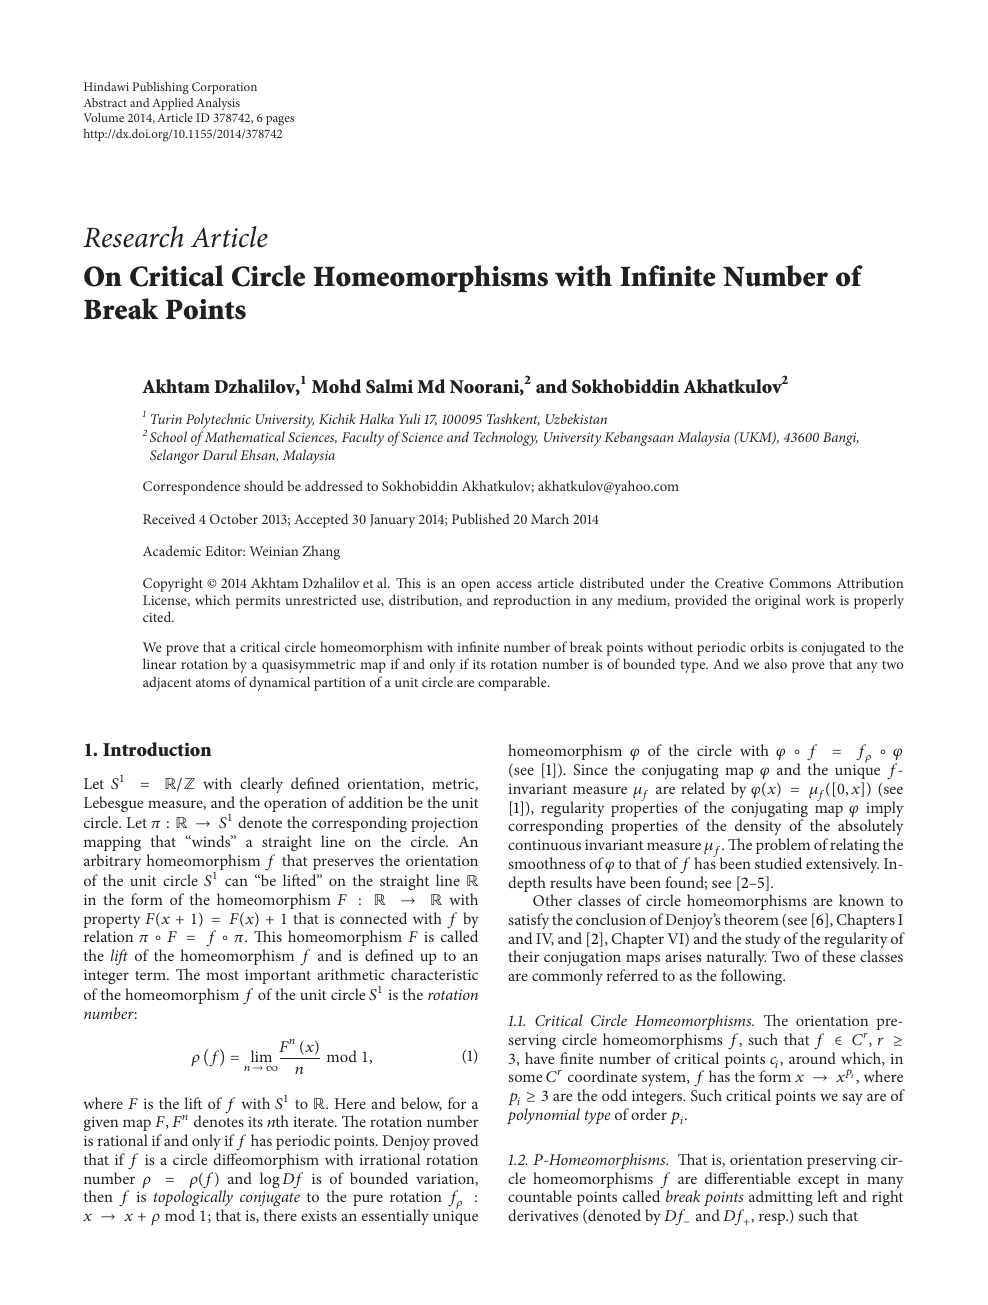 On Critical Circle Homeomorphisms With Infinite Number Of Break Points Topic Of Research Paper In Mathematics Download Scholarly Article Pdf And Read For Free On Cyberleninka Open Science Hub